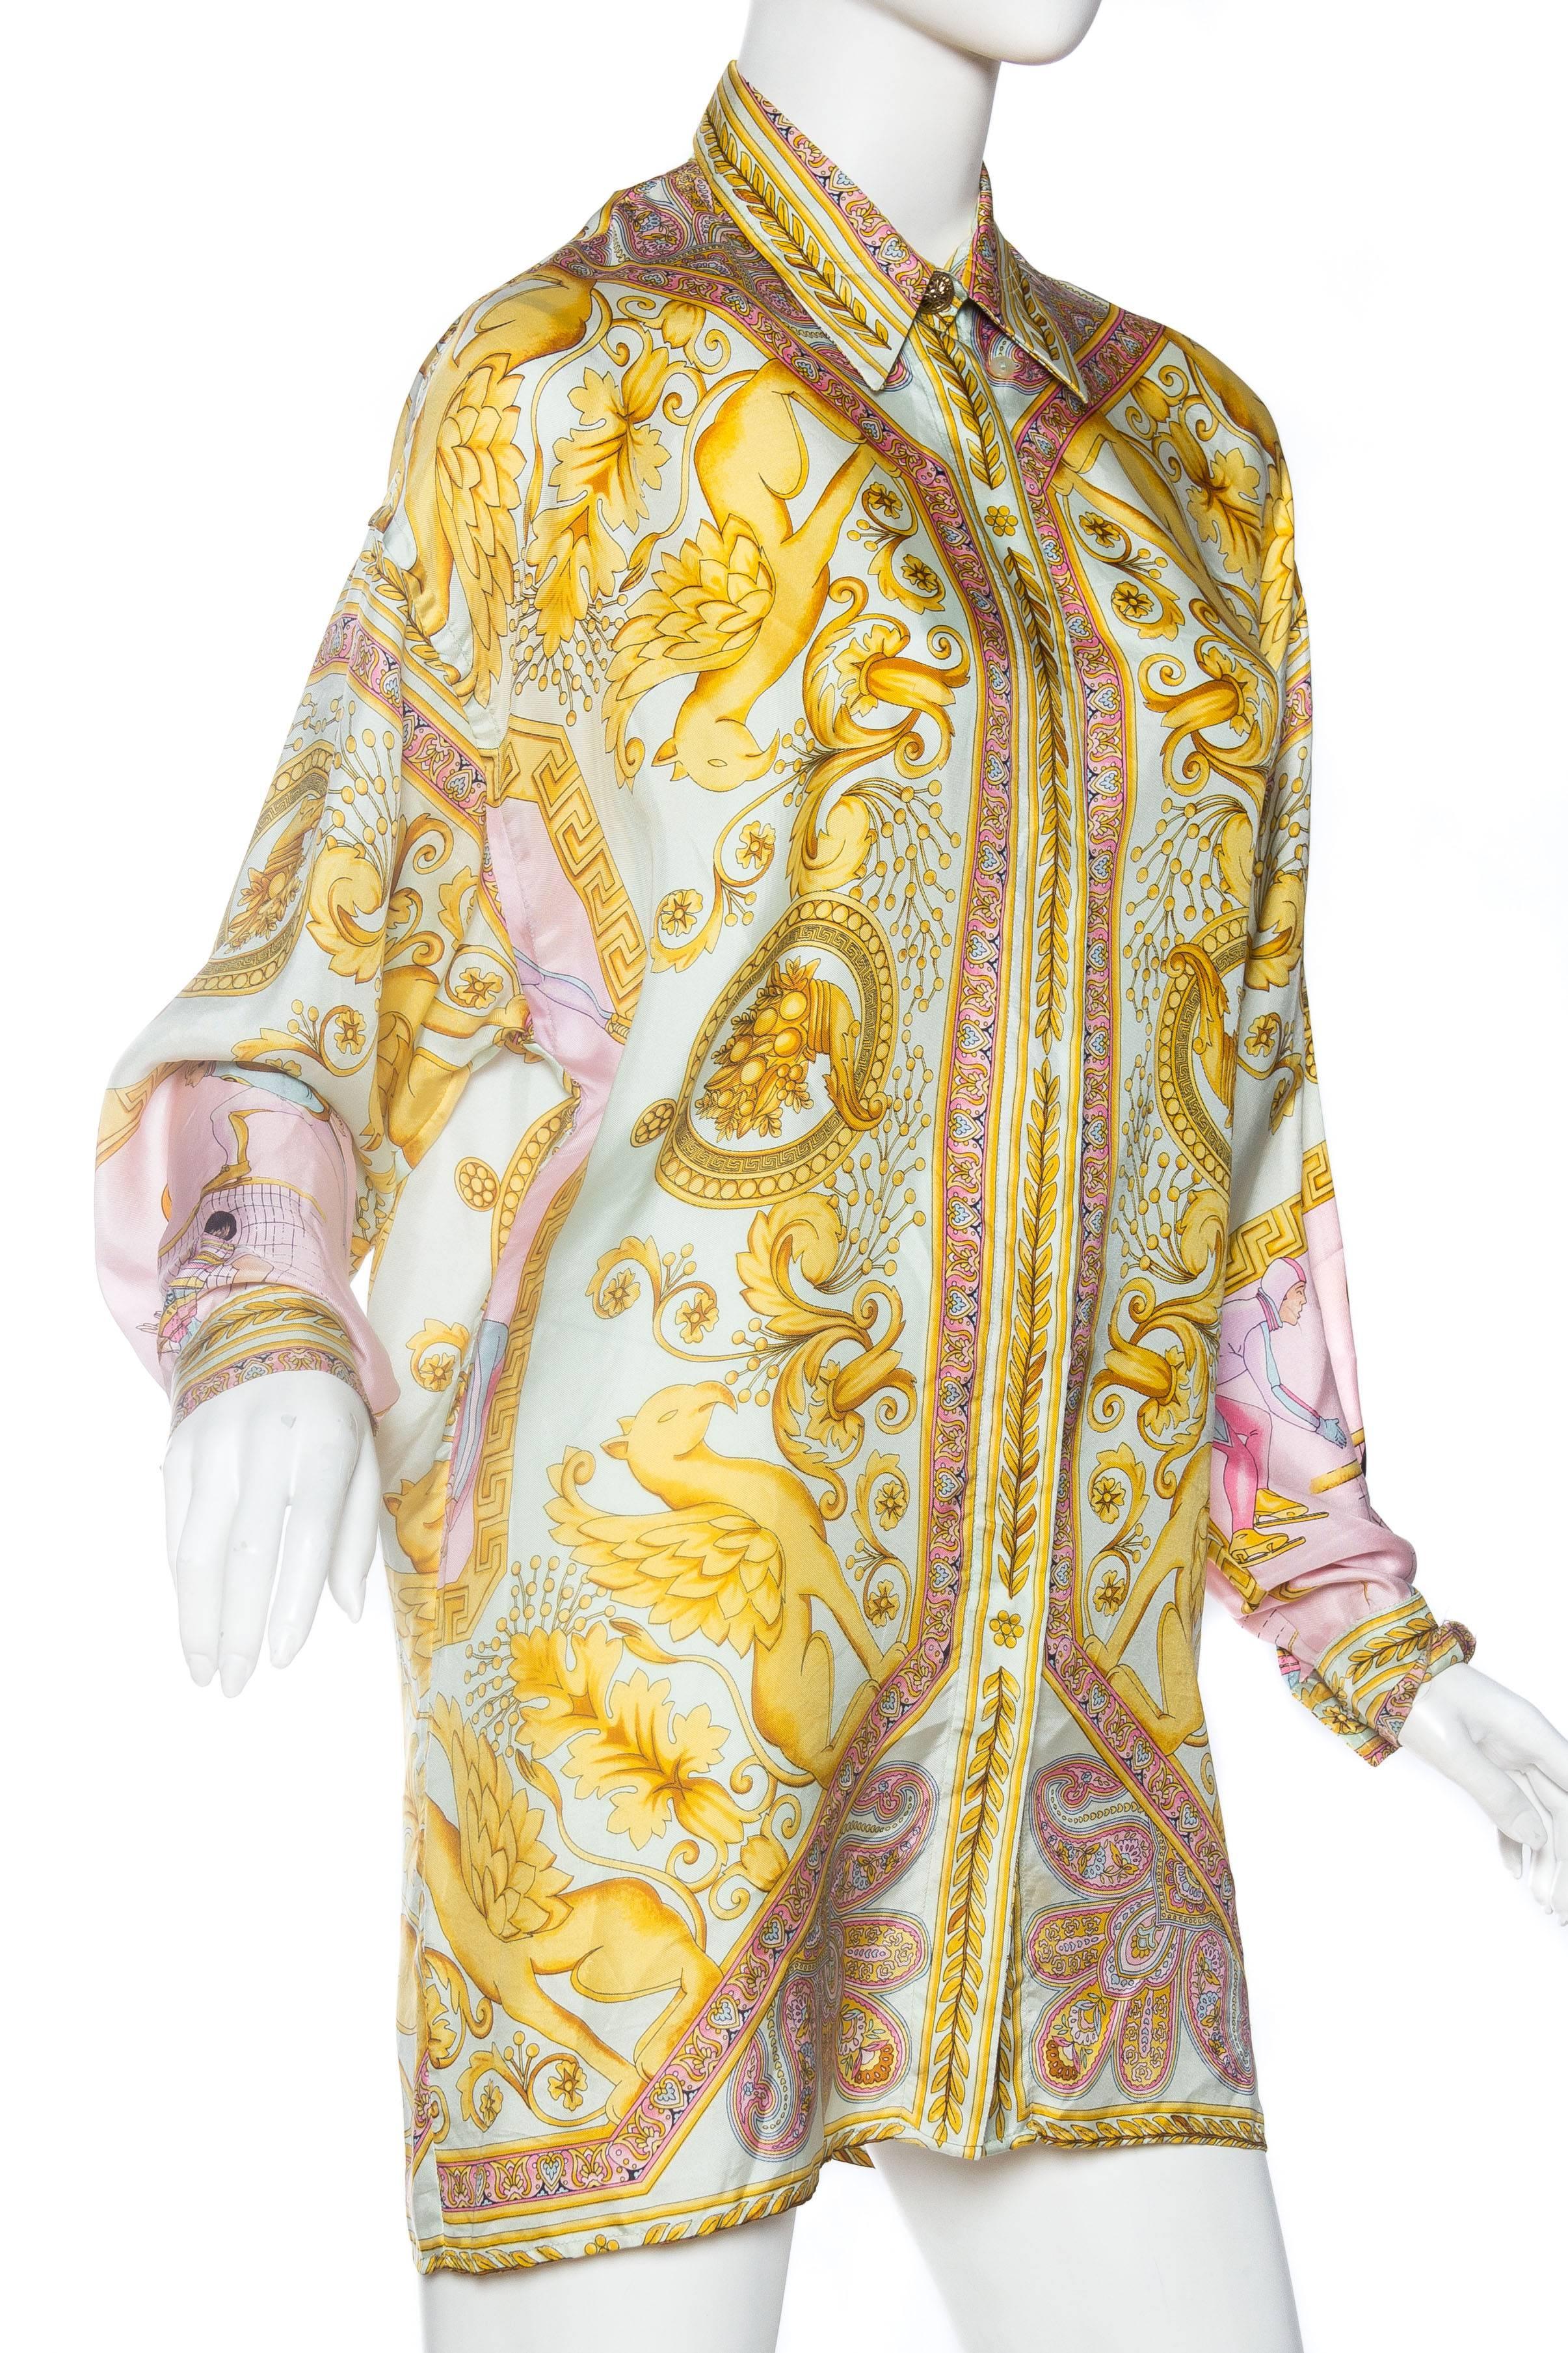 1990s Gianni Versace Gold Baroque Print Blouse 1